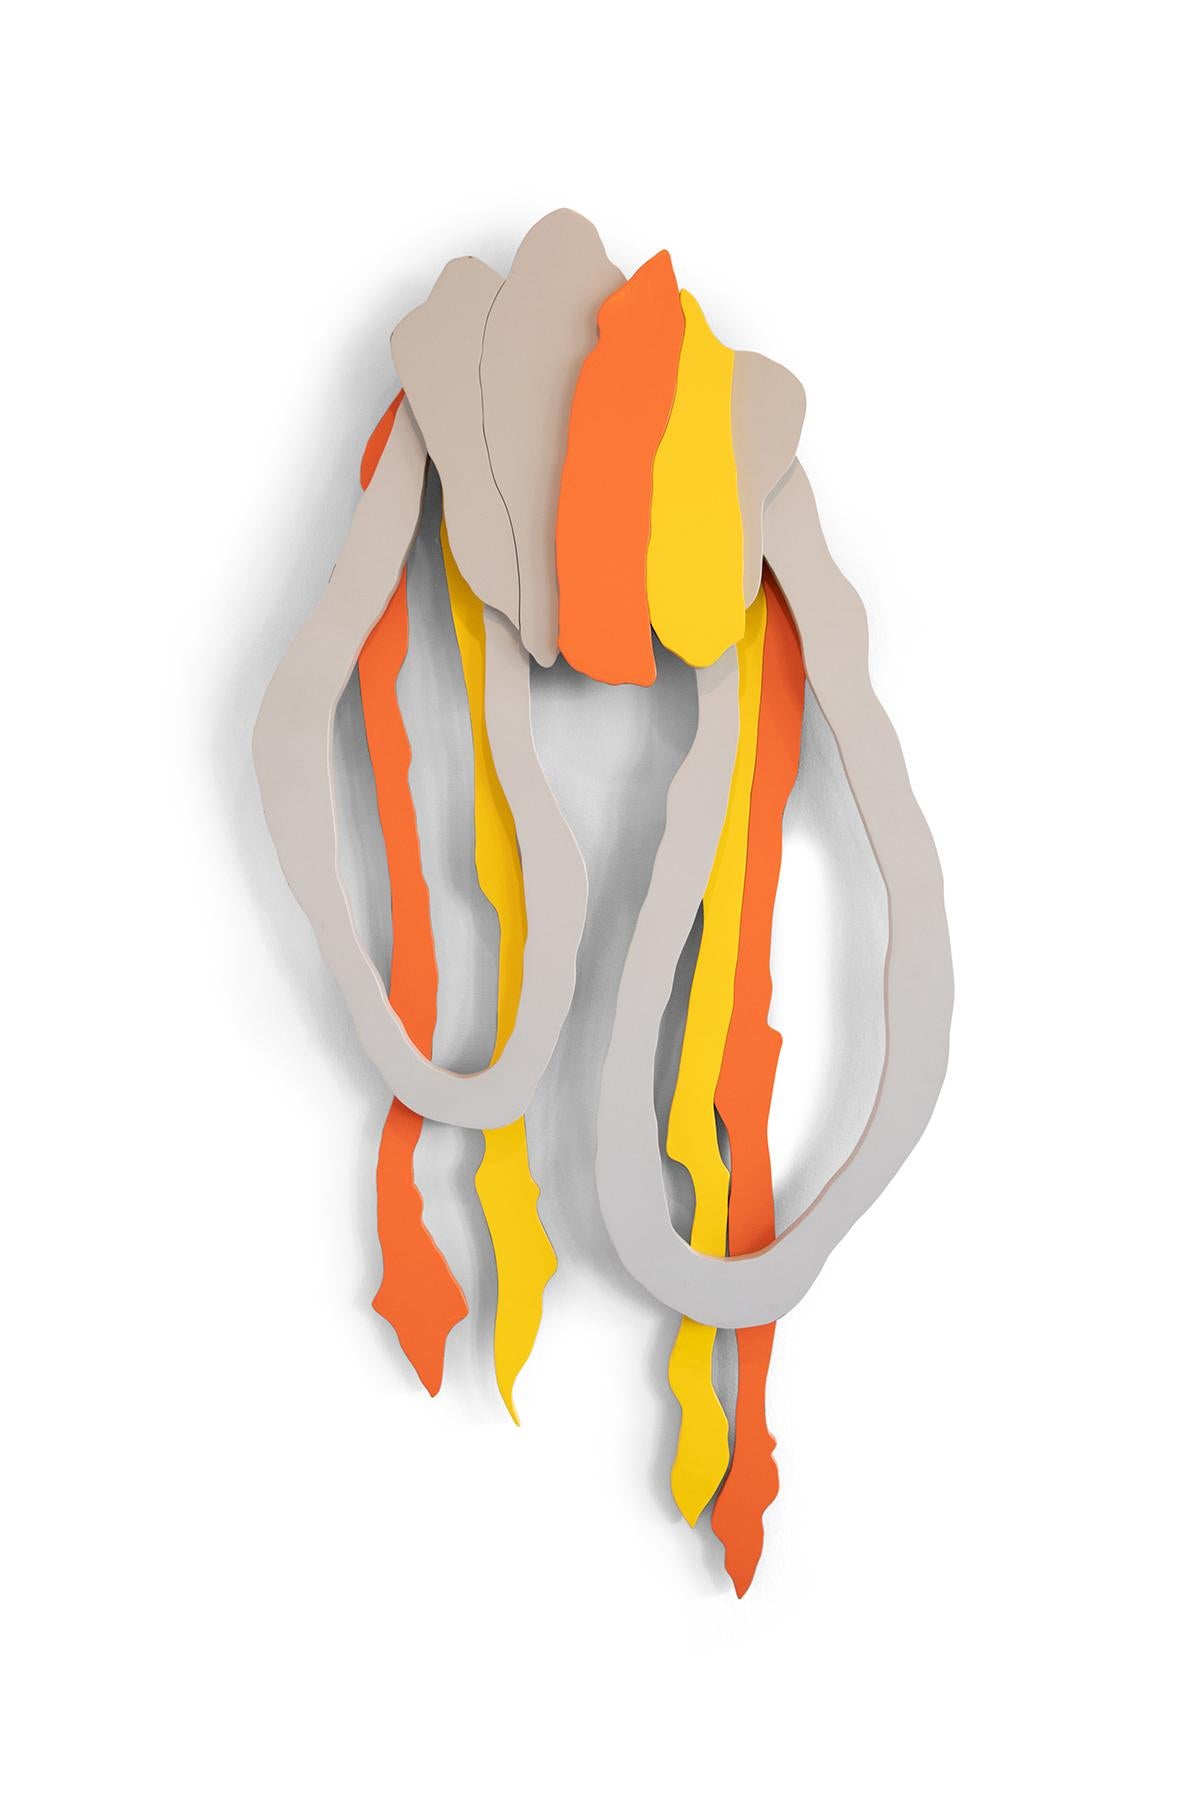 Jeff Low 'Variegated Knot' wall sculpture from 1984. This masterful example is enamel paint over wood in orange, yellow & light gray and it seamlessly melds color and form.